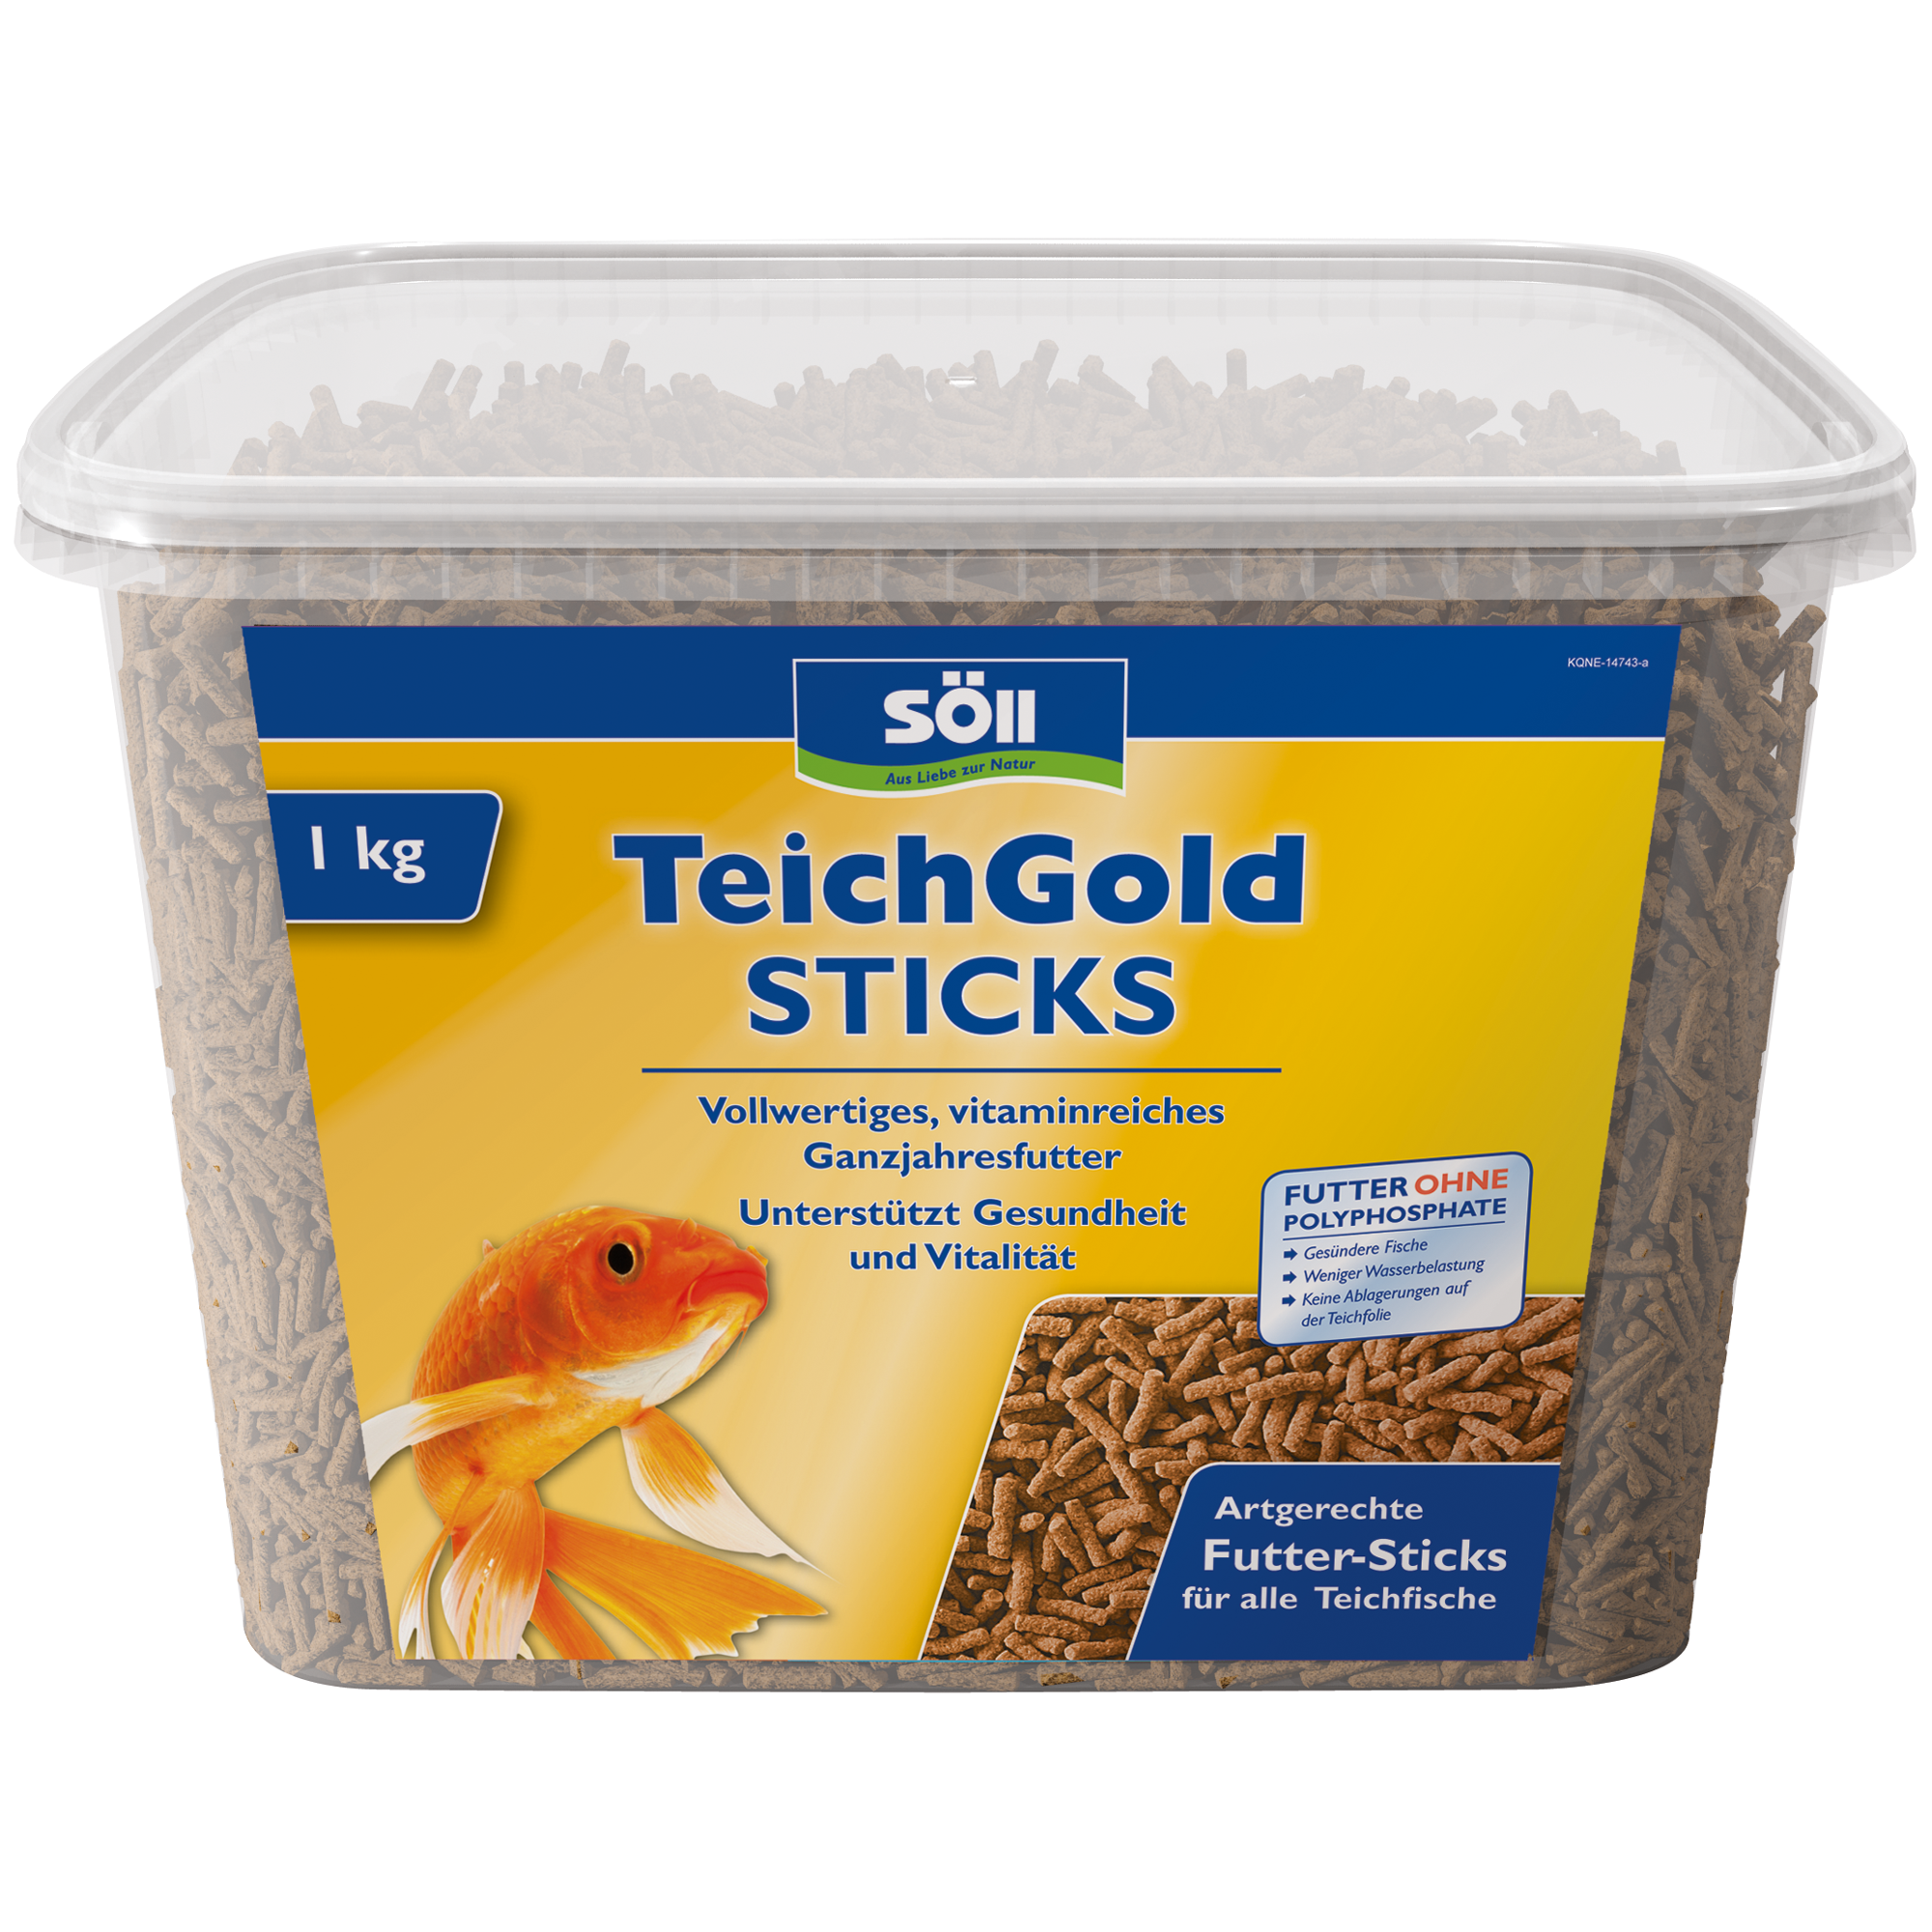 TEICH-GOLD Futter-Sticks 940 g + product picture